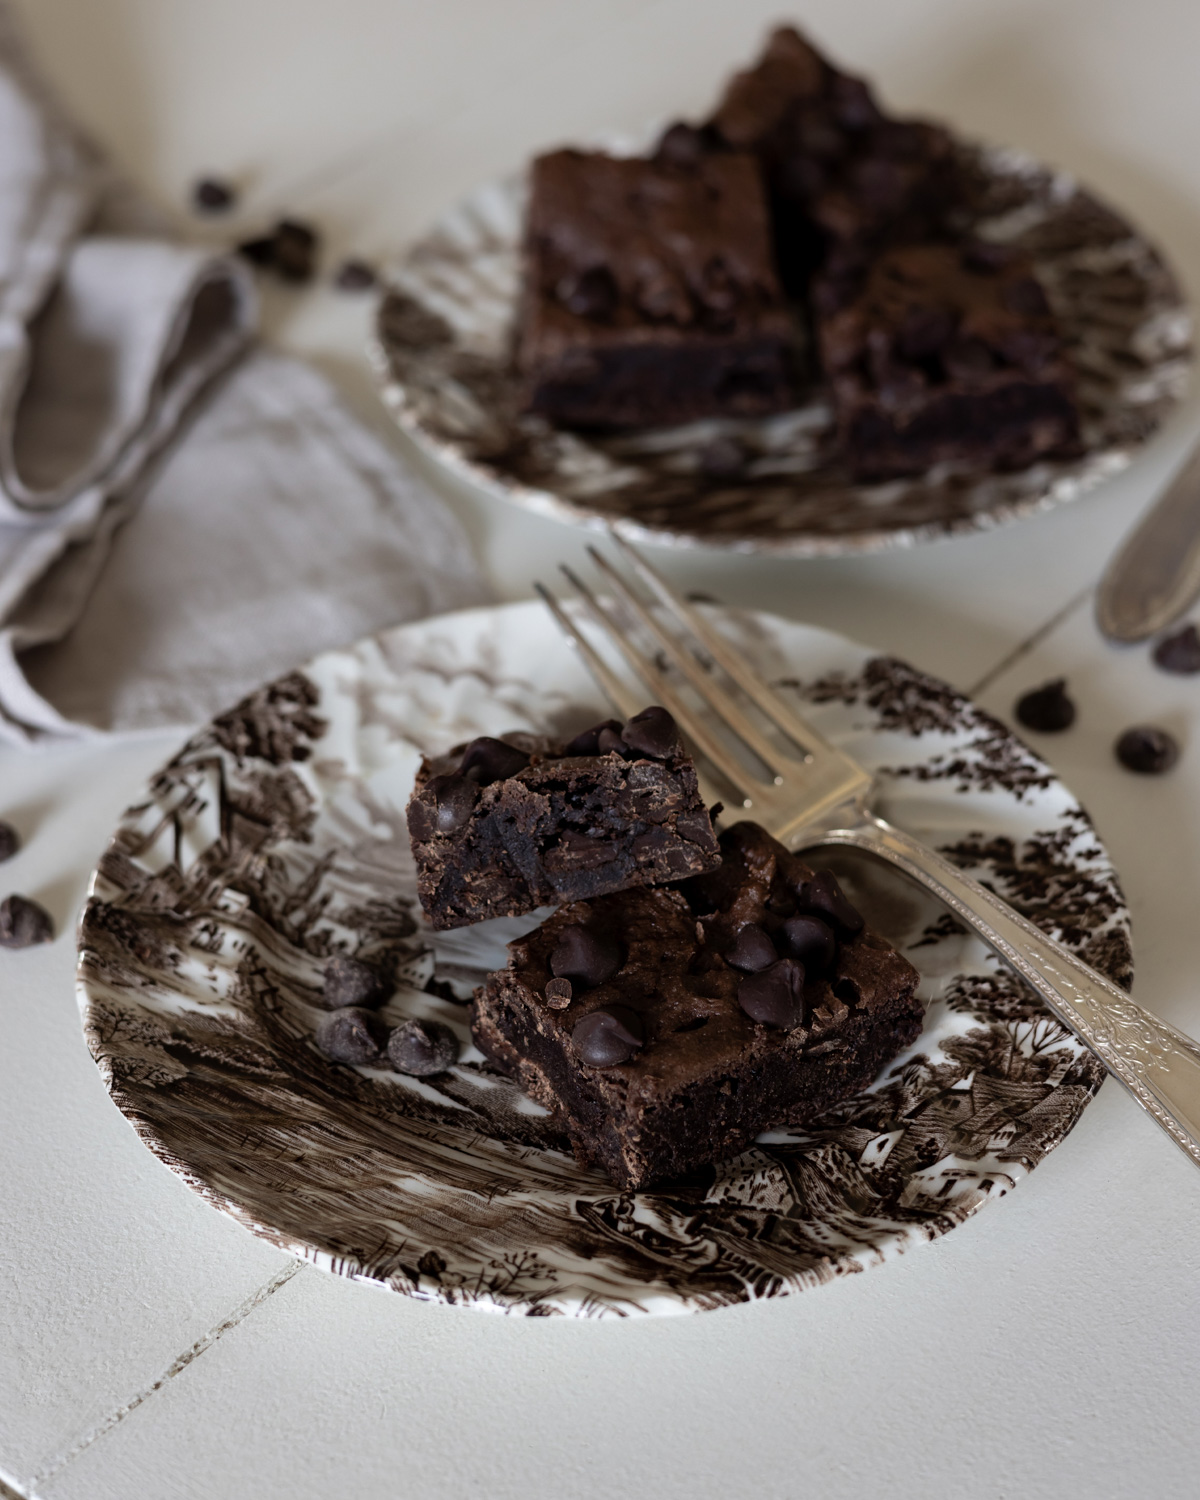 Cake mix brownie squares served on ironstone plates.